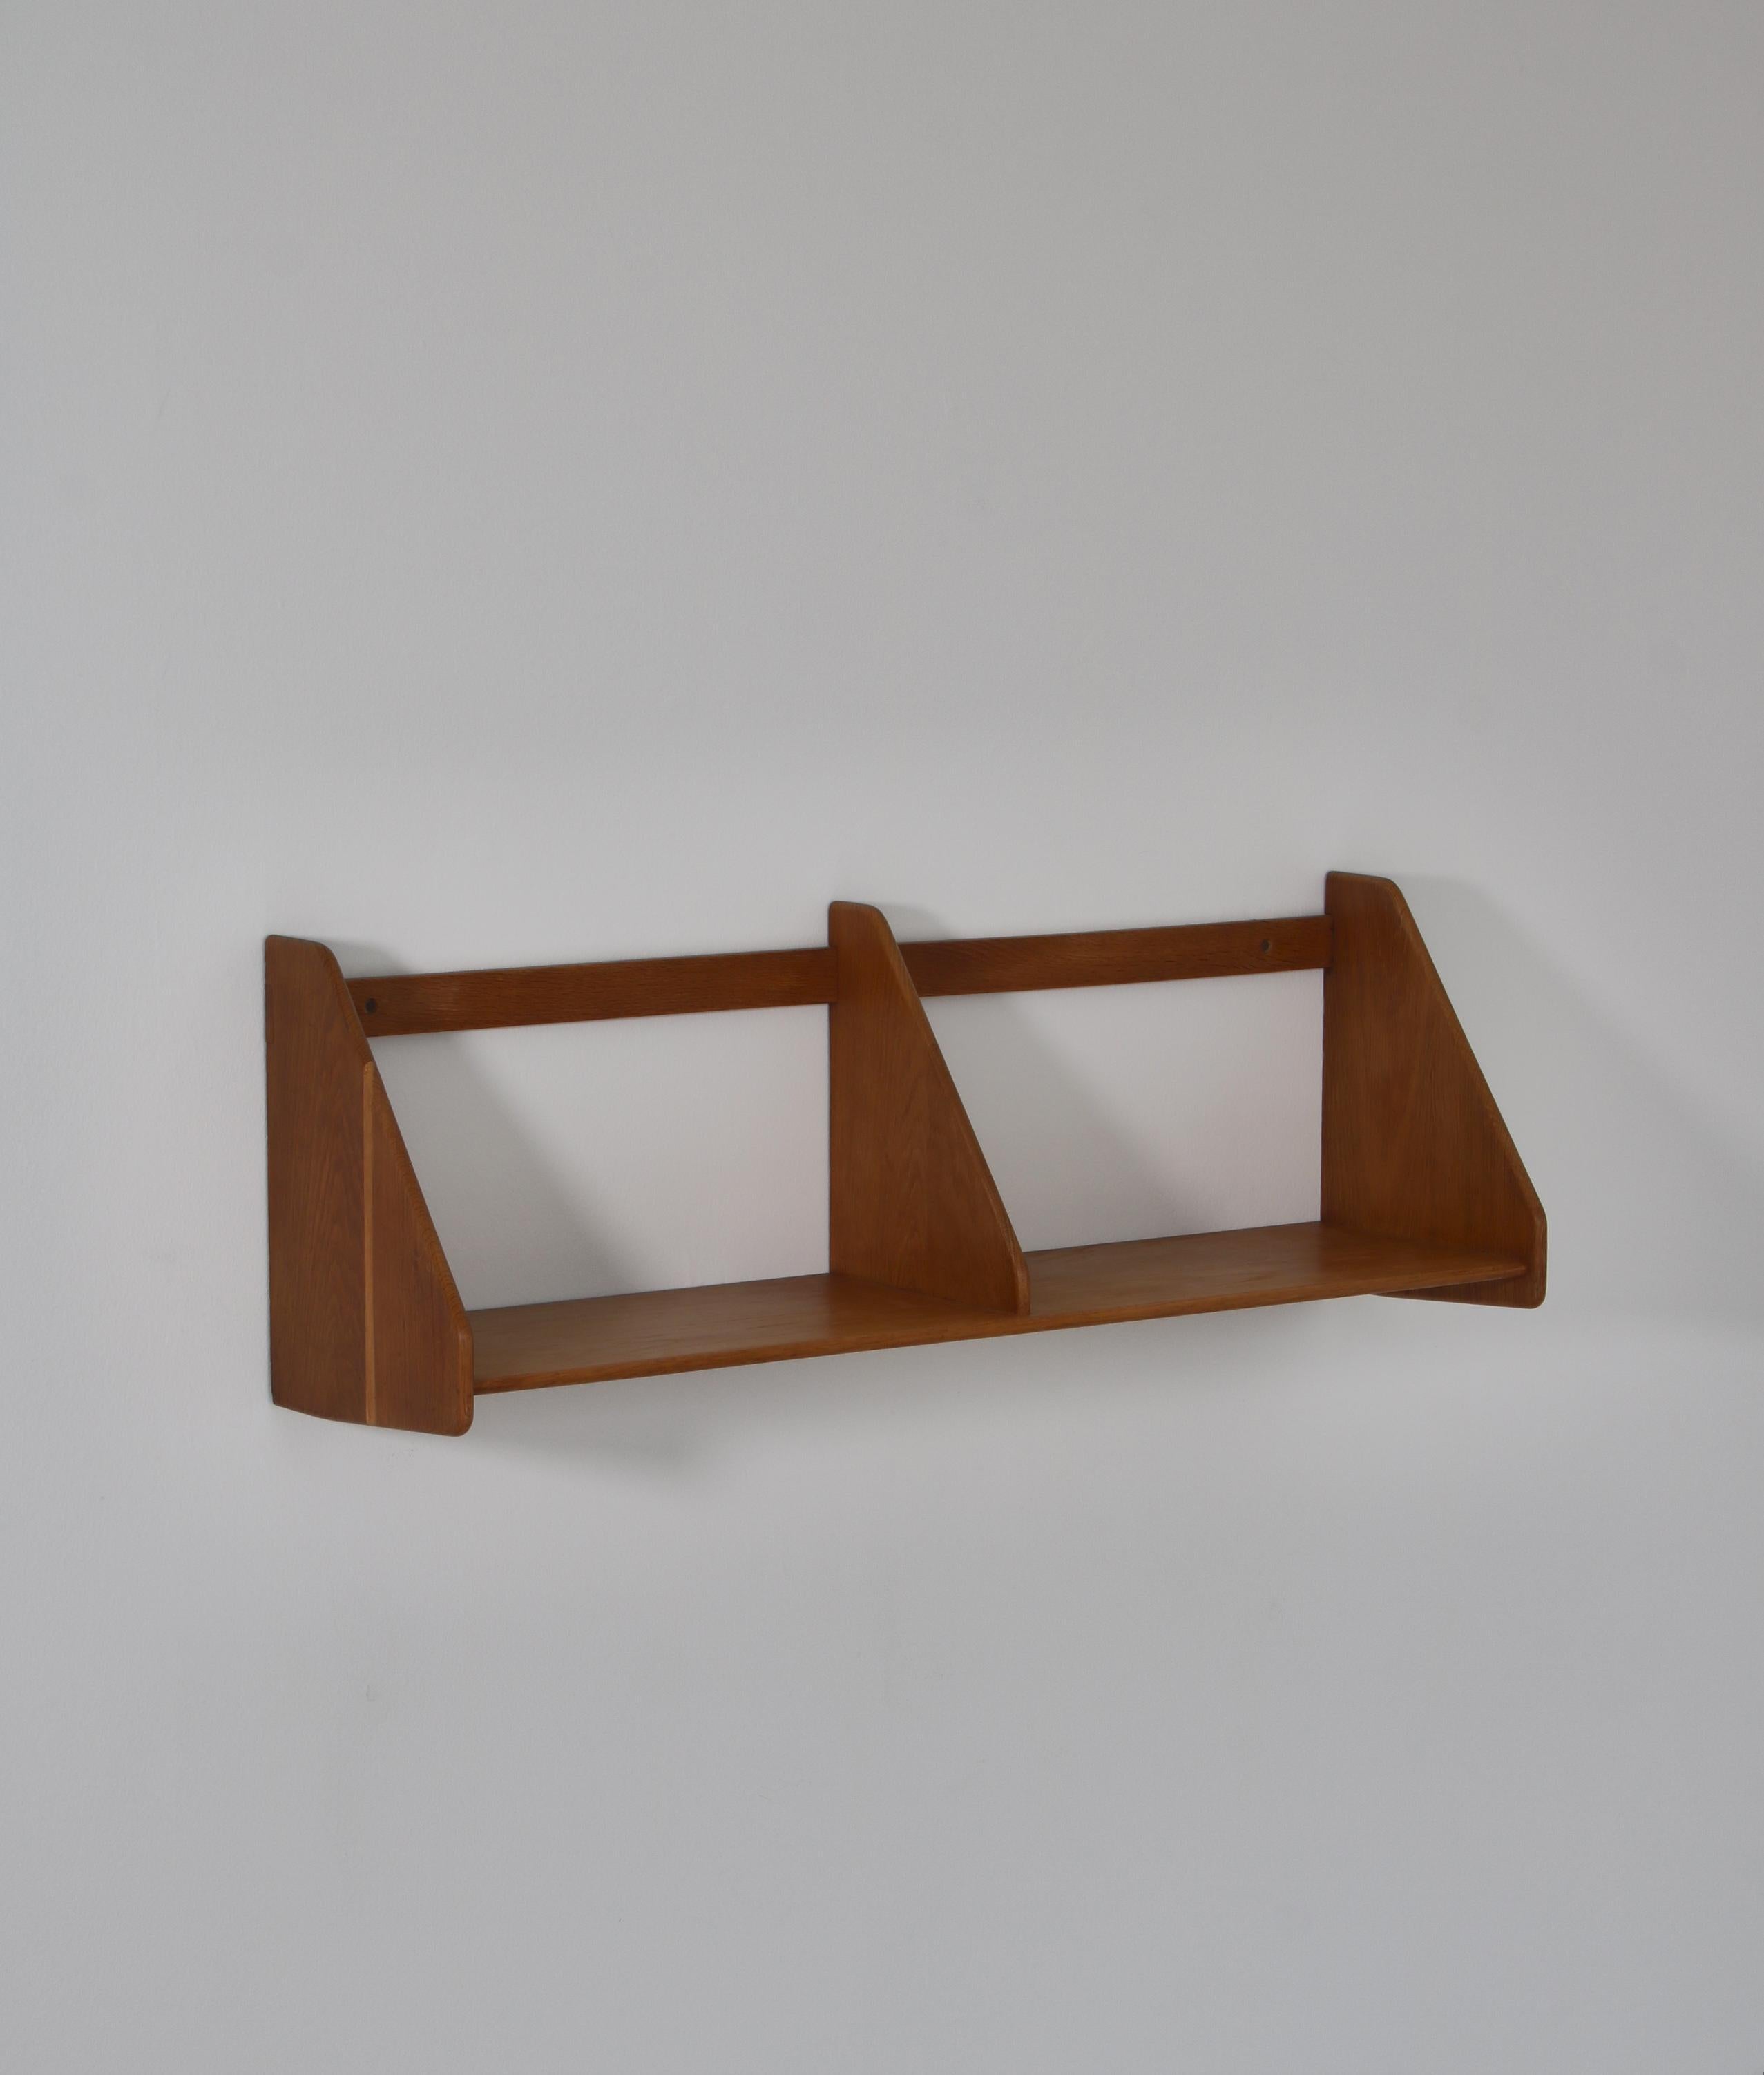 Hans J. Wegner Large Wall Shelf in Patinated Oak Made at Ry Mobler Denmark 1950s In Good Condition For Sale In Odense, DK